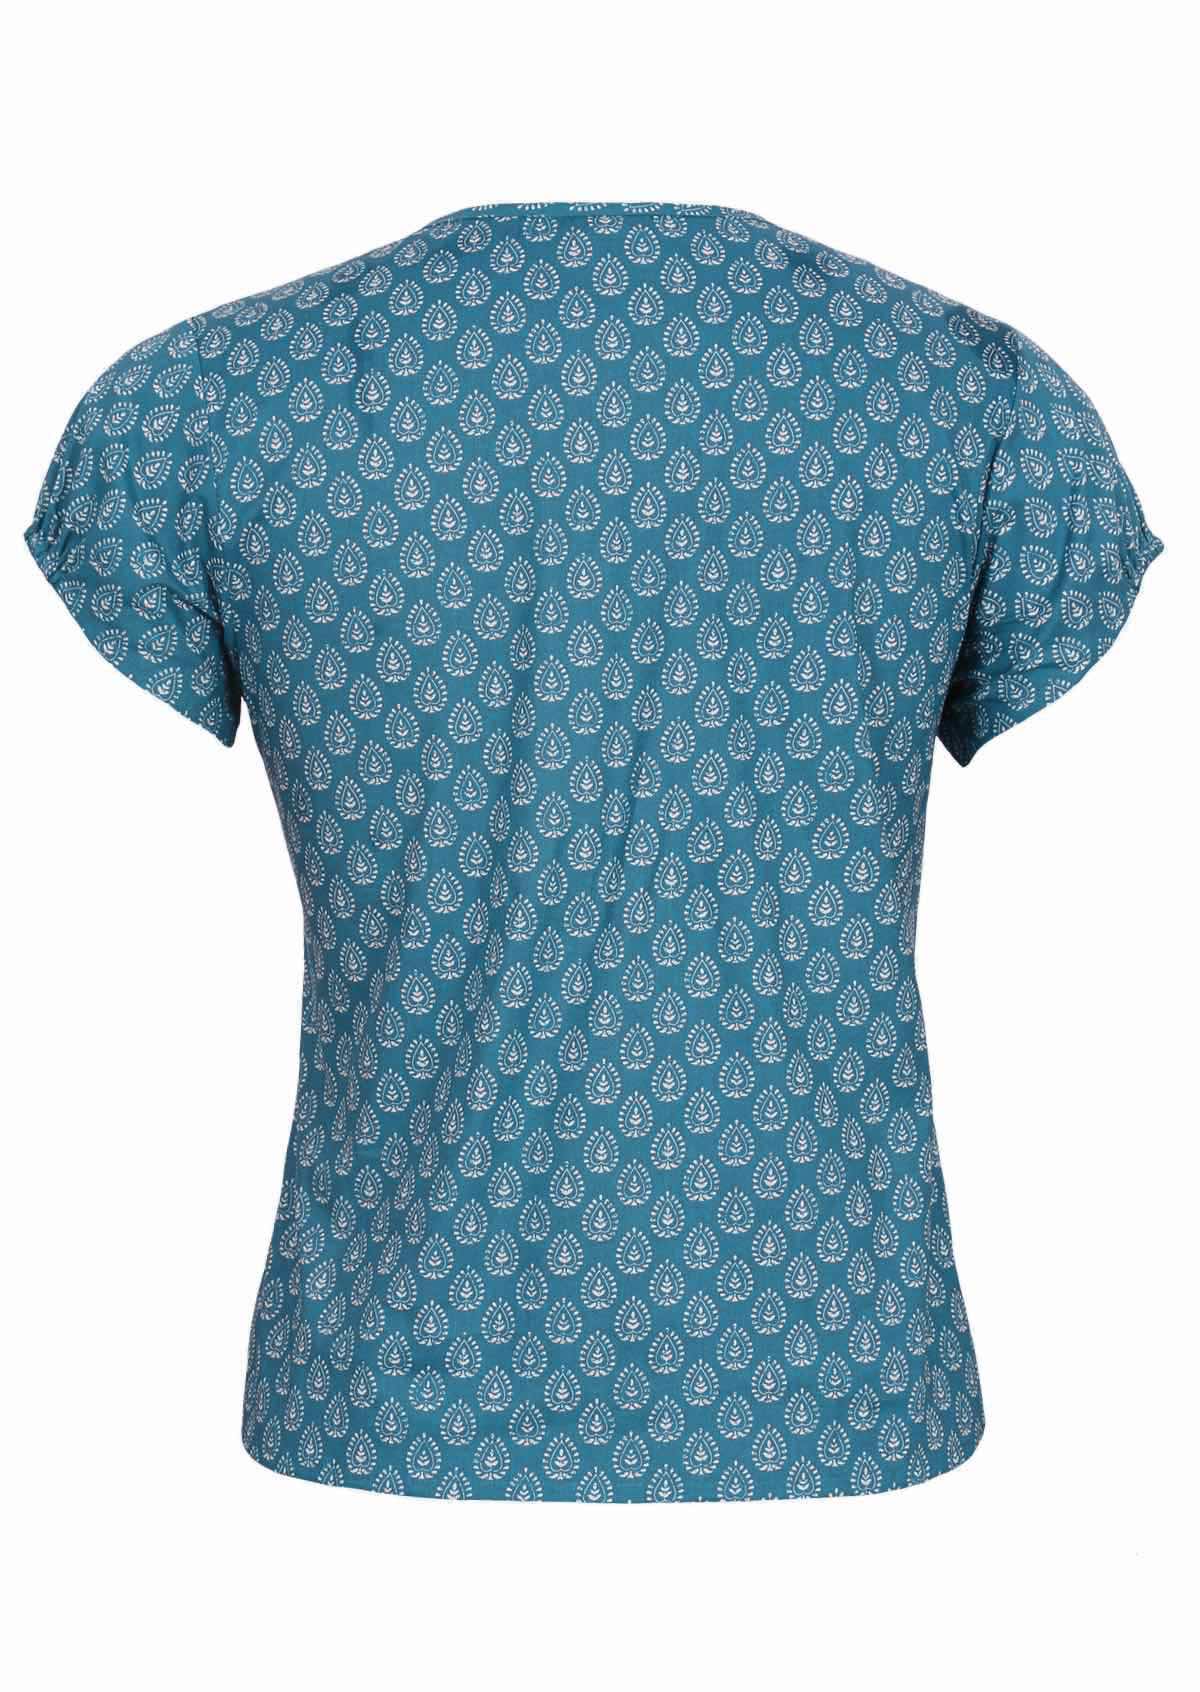 short sleeve cotton top with white print on blue base